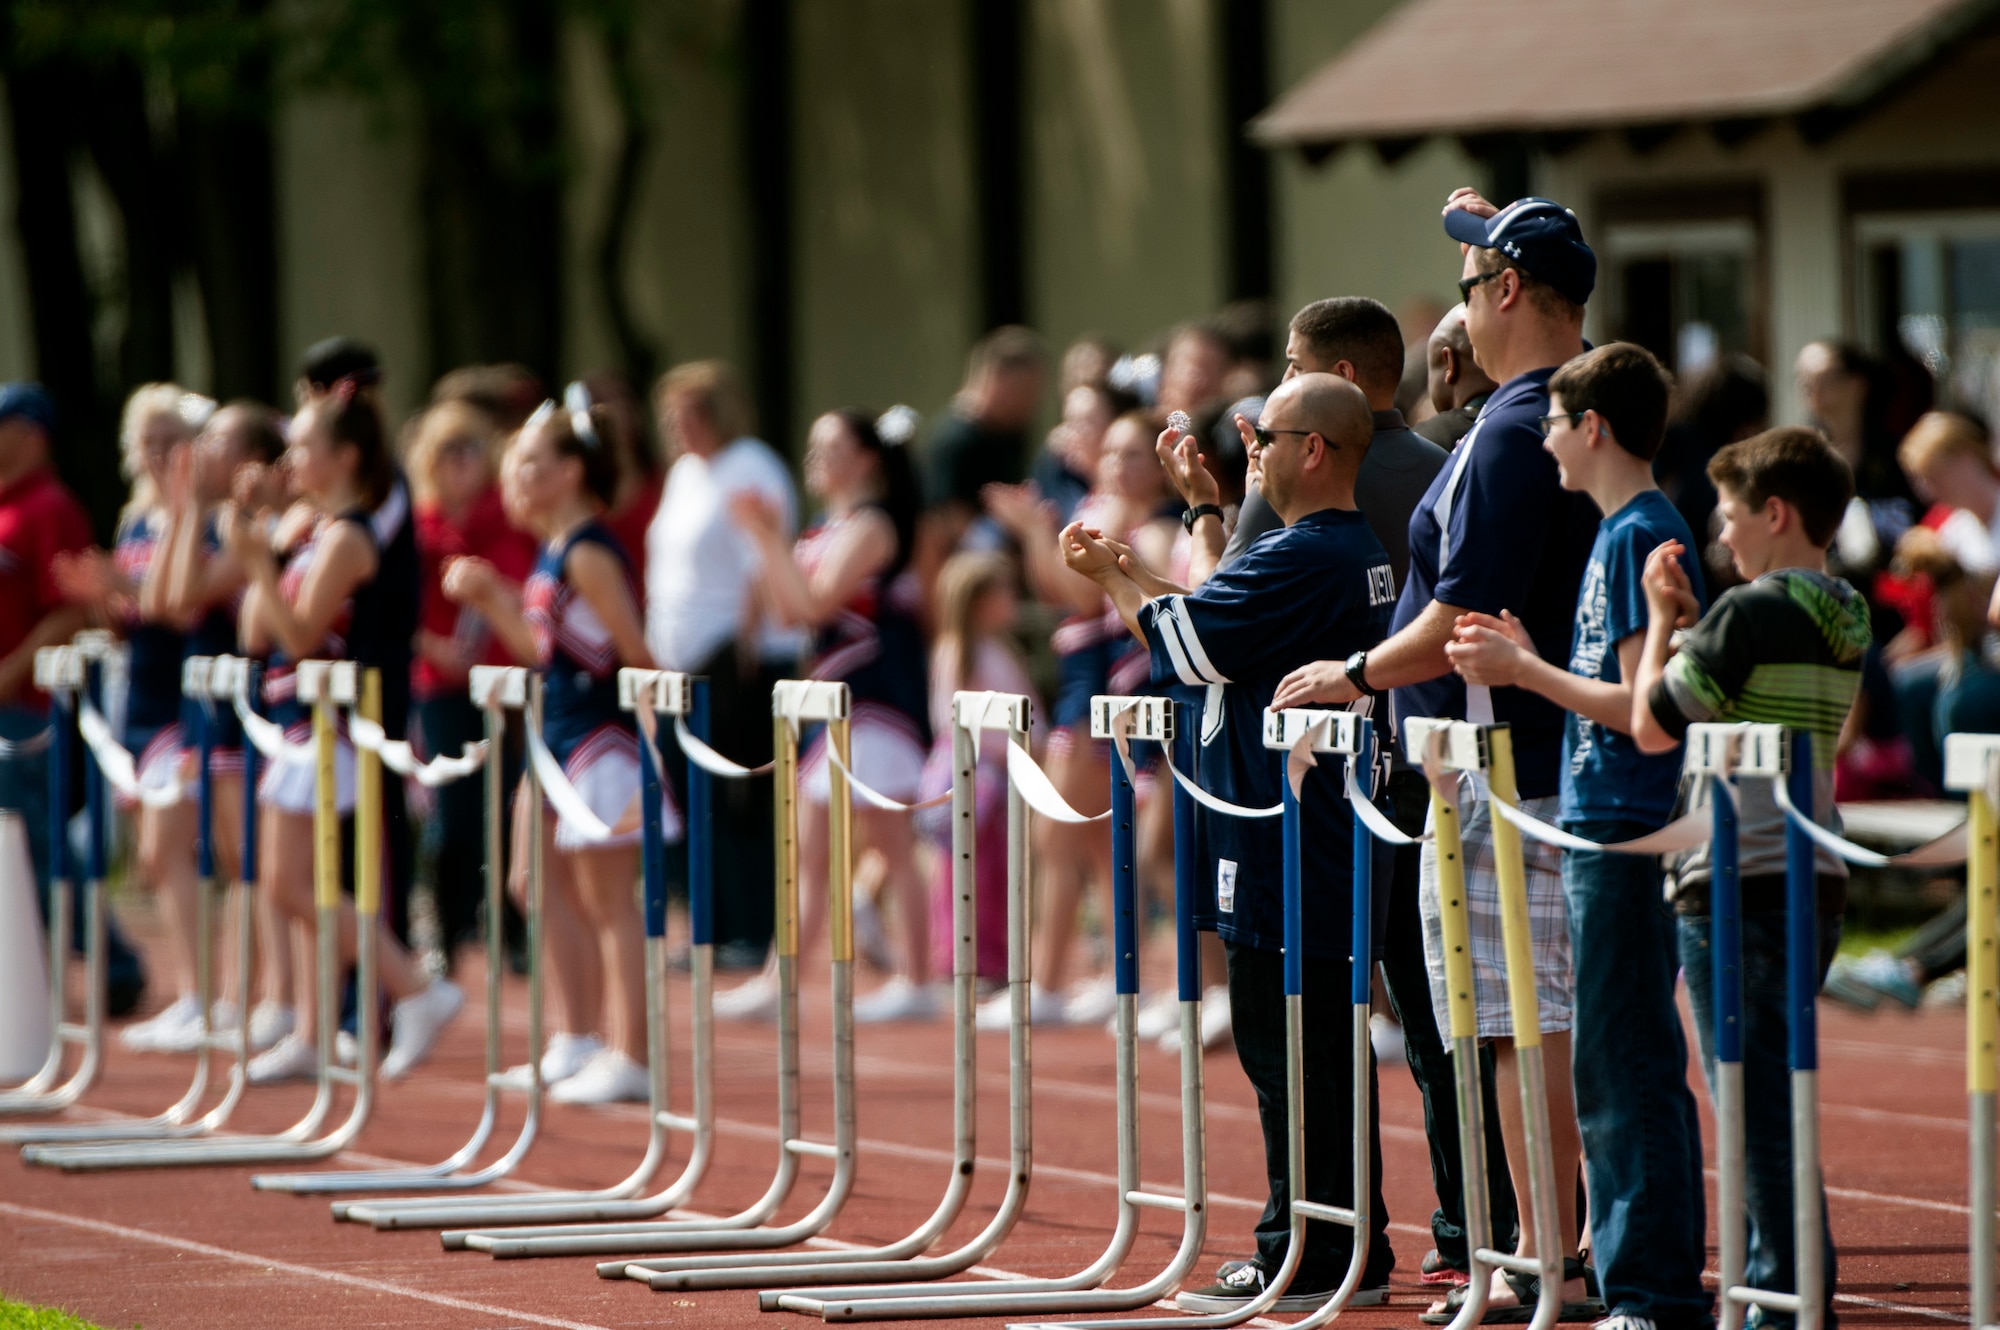 Fans cheer for the Bitburg Barons football team during the season opener game against the Baumholder Buccaneers Sept. 6, 2014, at Bitburg Annex, Germany. By half time, the Barons led the Buccaneers 12-8. (U.S. Air Force photo by Senior Airman Rusty Frank/Released)